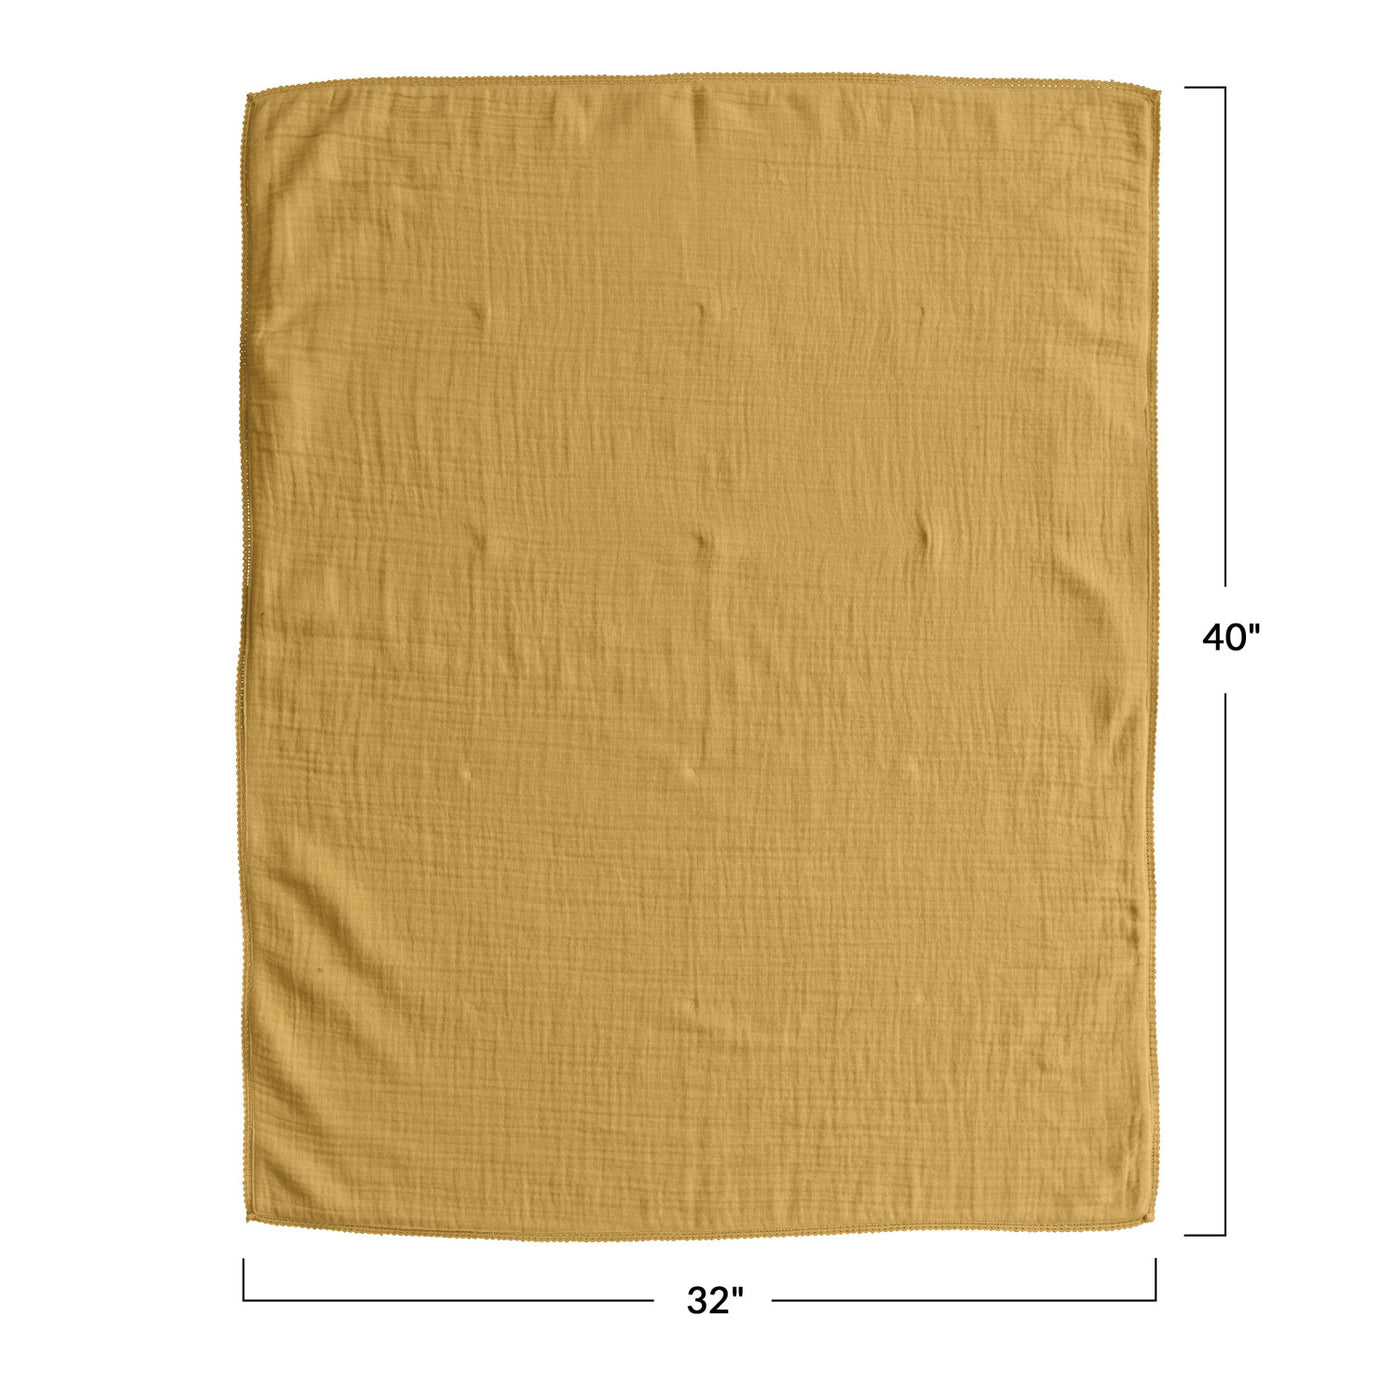 Mustard Cotton Double Cloth Baby Blanket